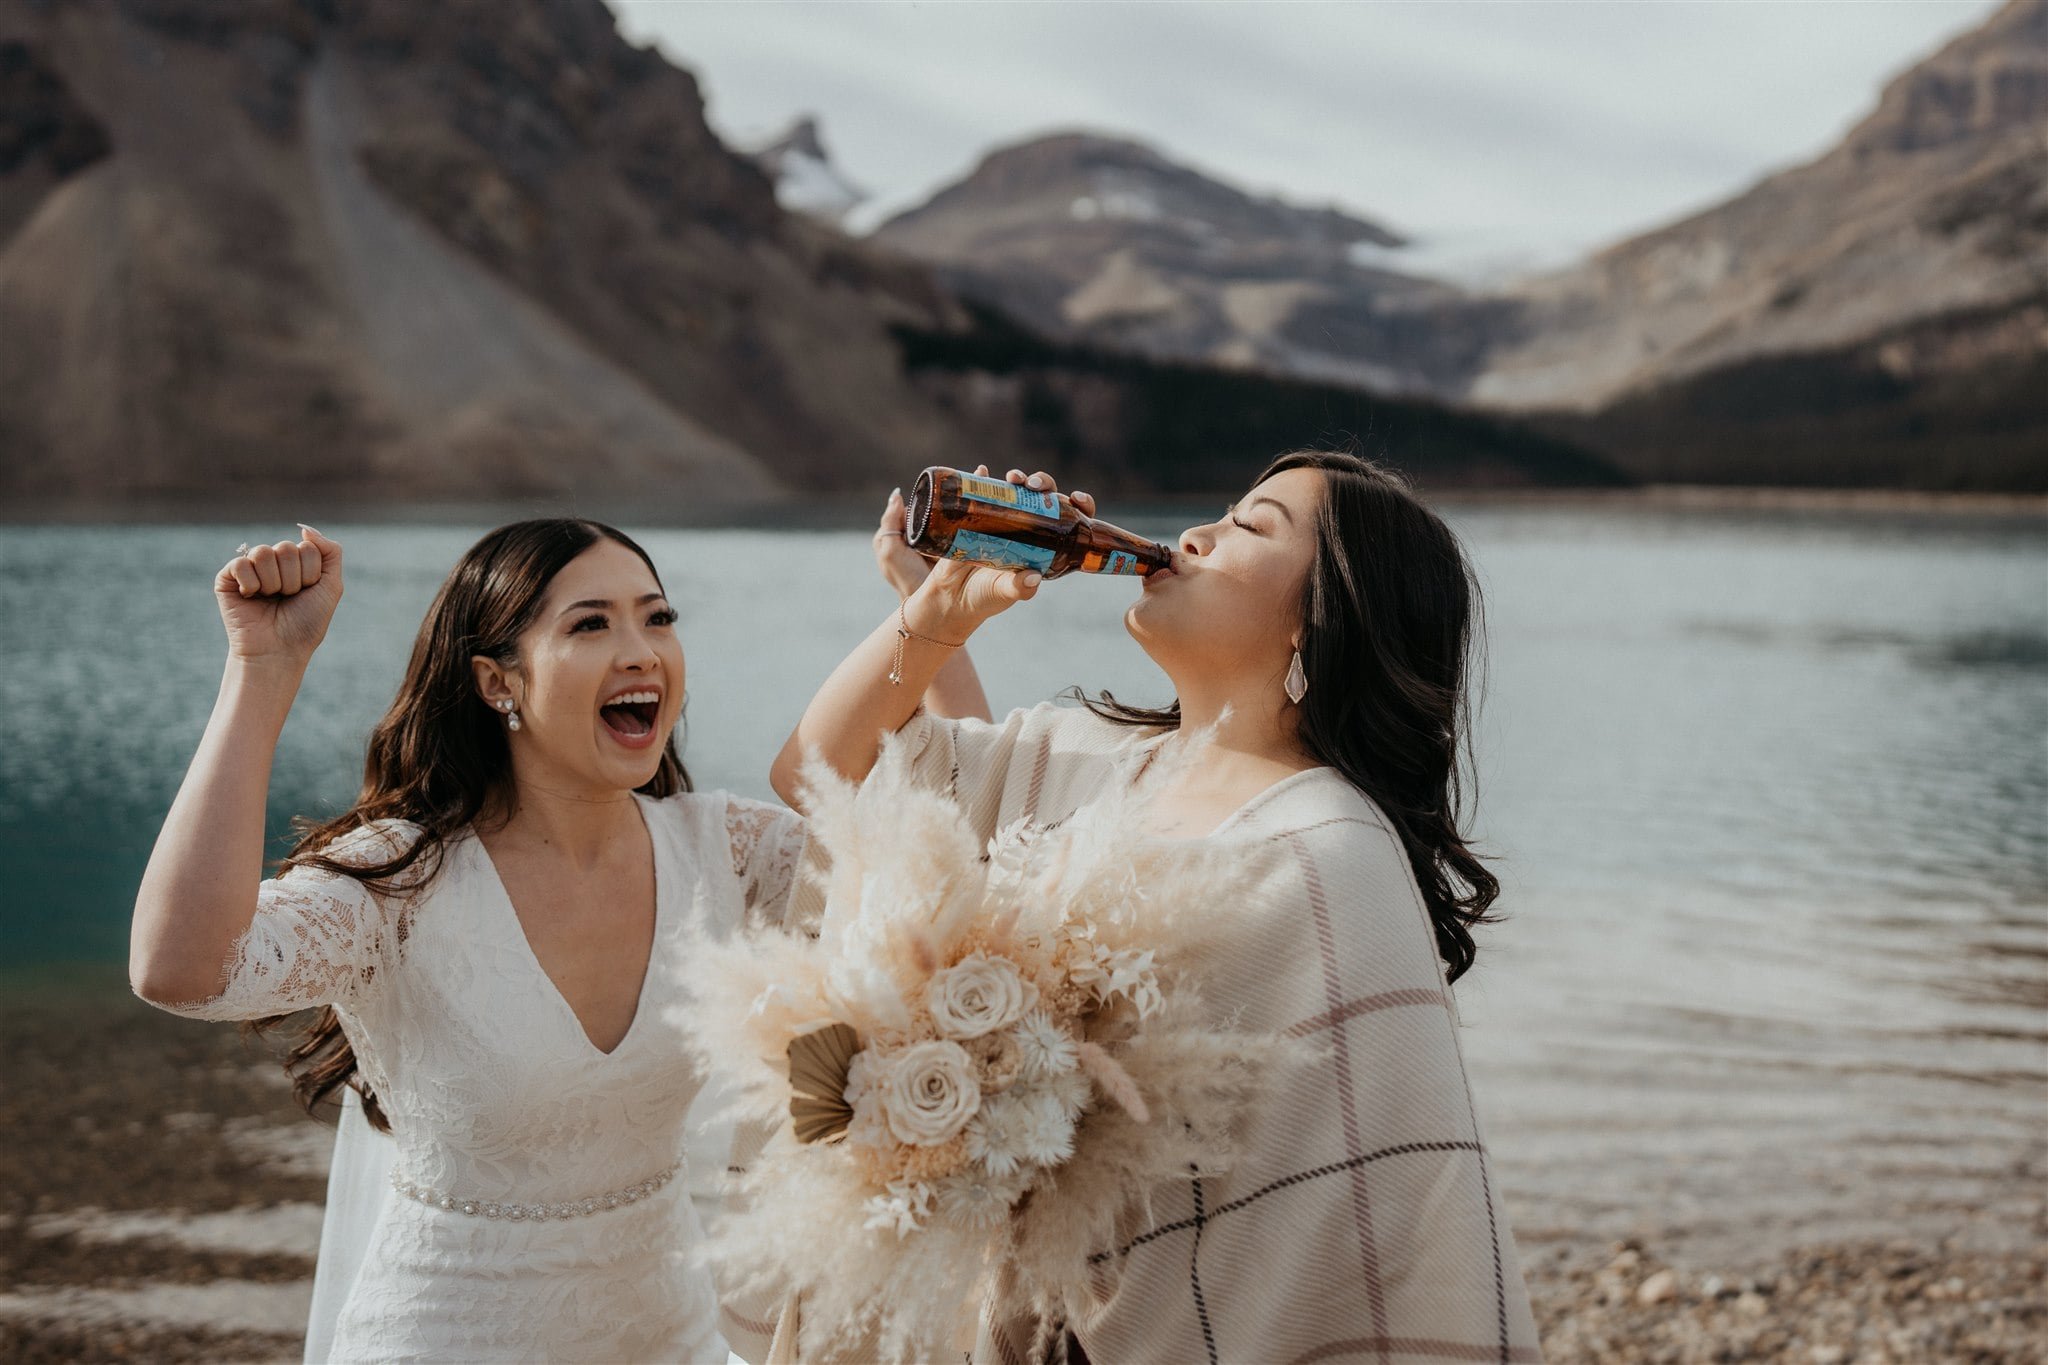 Bride cheers while guest chugs a beer after elopement ceremony in Banff National Park